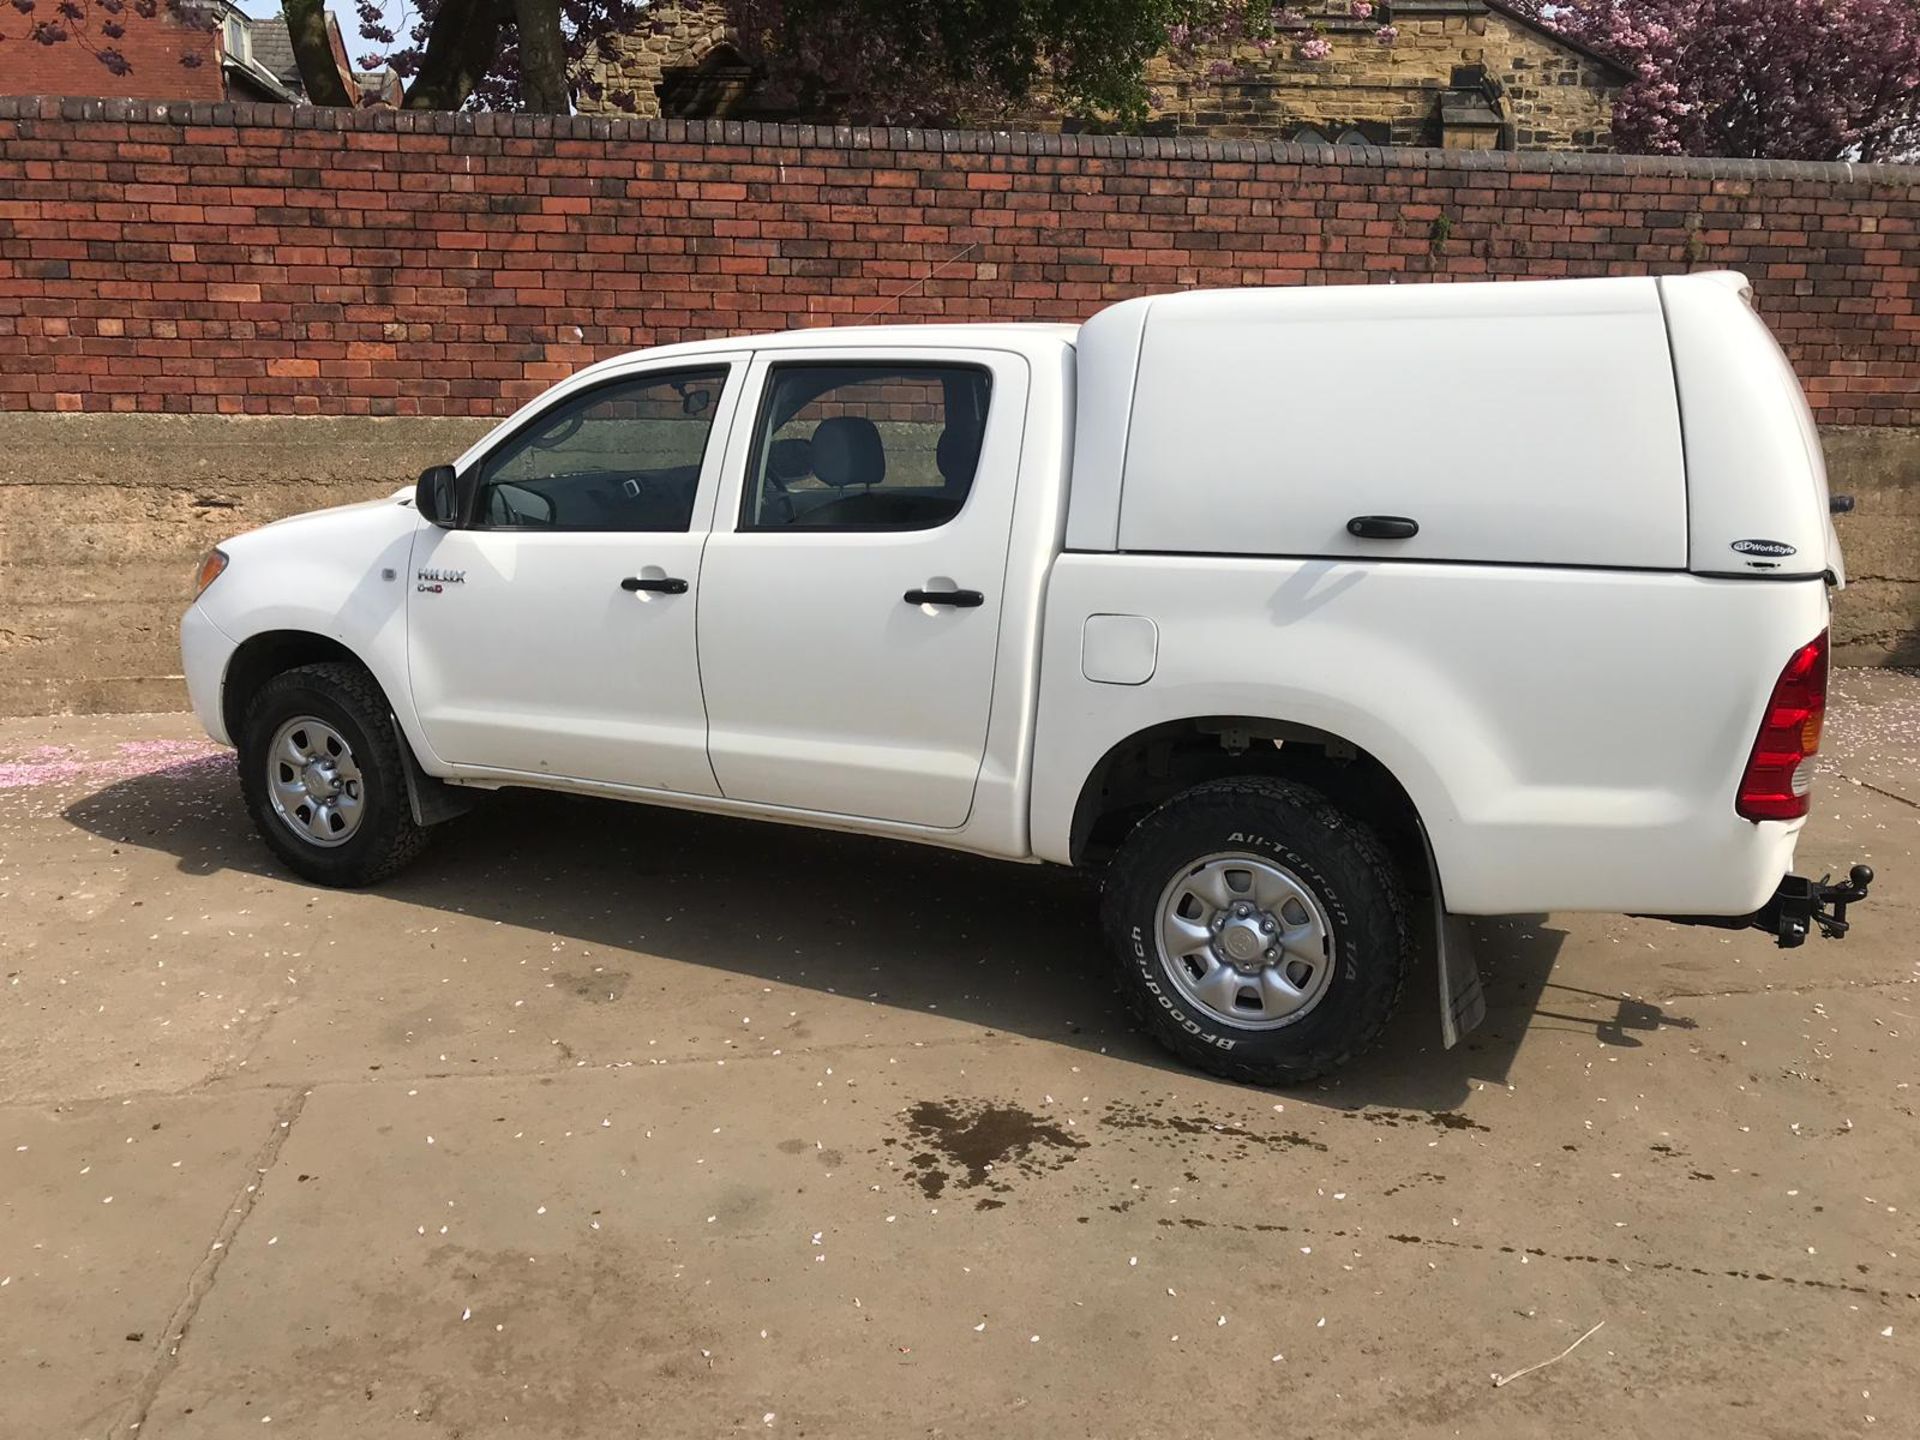 2008/58 REG TOYOTA HILUX HL2 D-4D 4X4 DOUBLE CAB PICK UP, SHOWING 0 FORMER KEEPERS *PLUS VAT* - Image 3 of 20